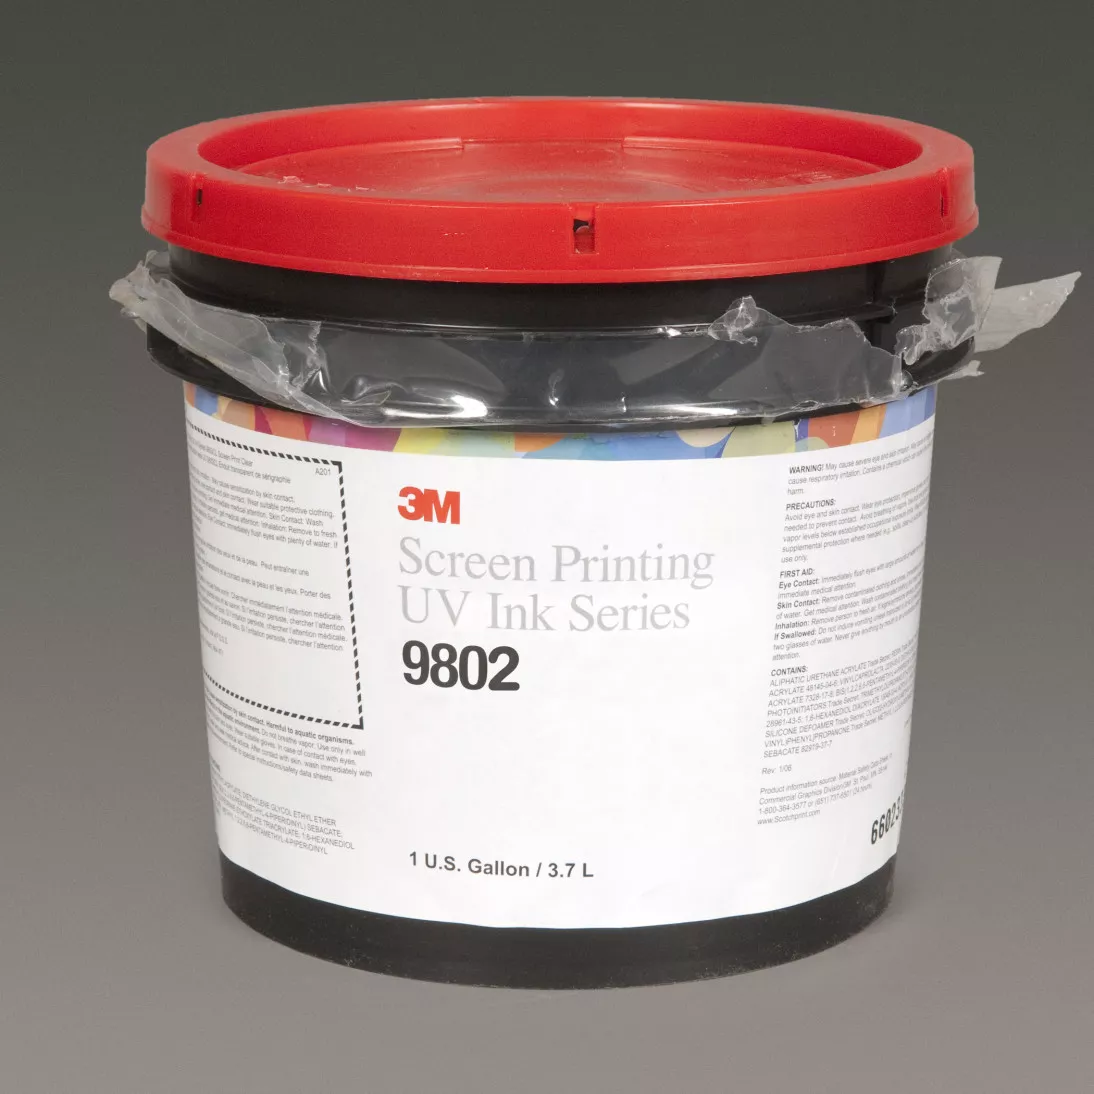 3M™ Screen Printing UV Ink 9802, Opaque Black, 1 Gallon Container